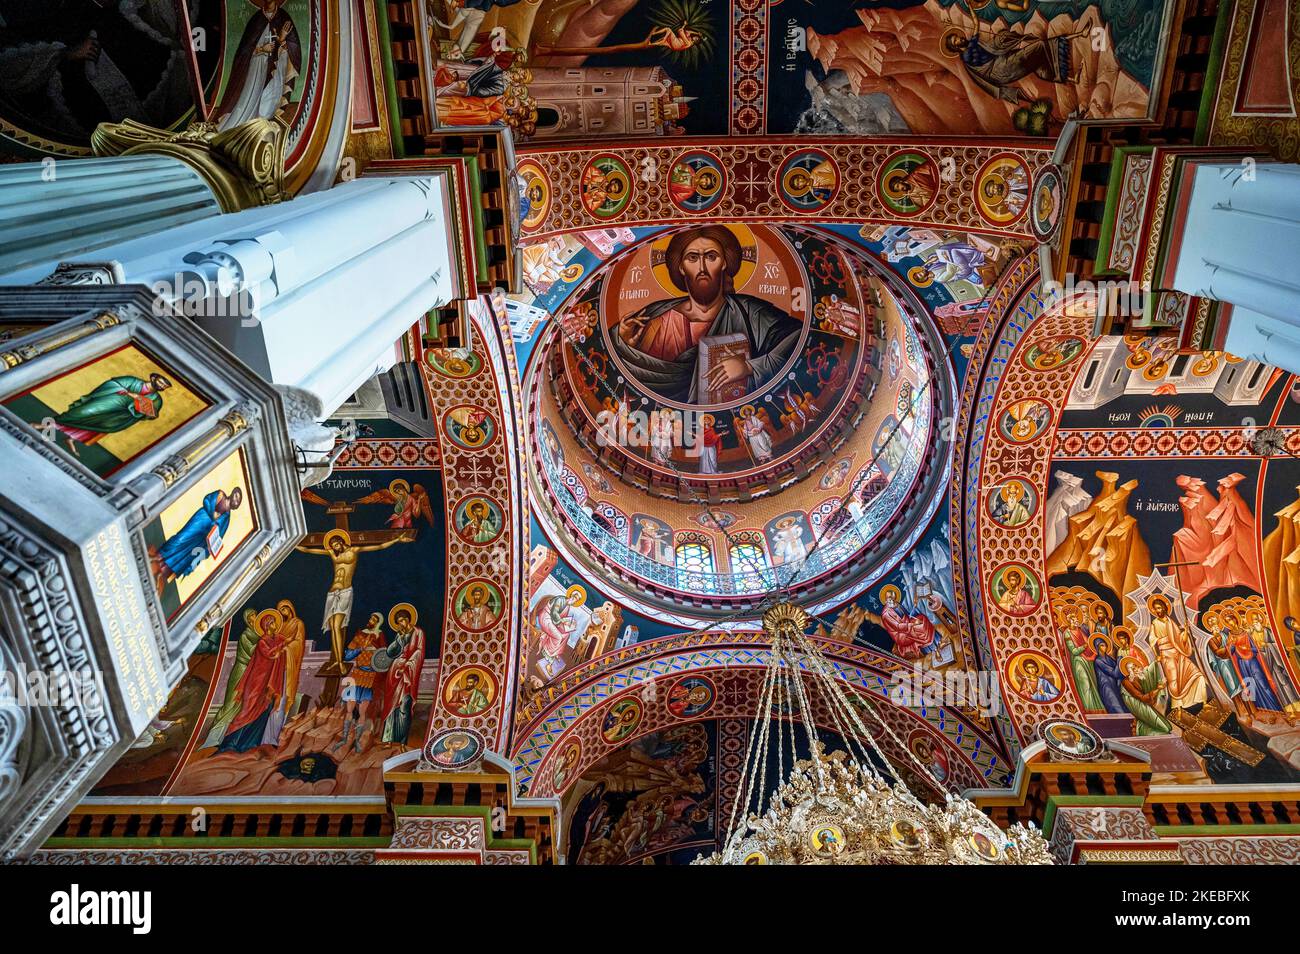 Monumental beautiful painting in cupola of Agios Minas cathedral, Heraklion, Crete, Greece. Stock Photo